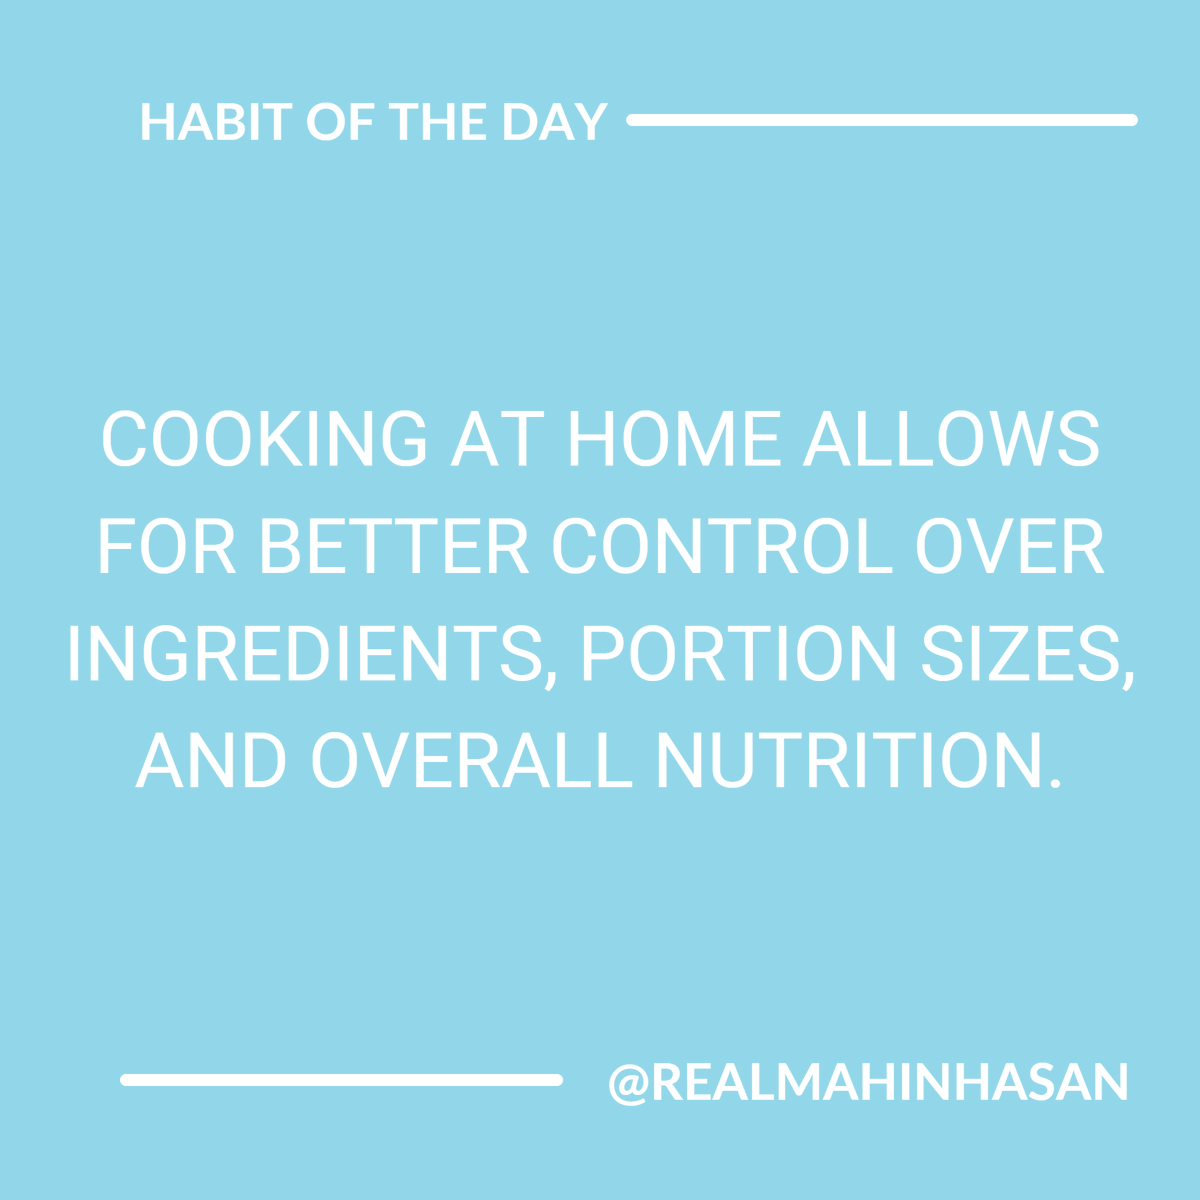 #CookAtHome: Save money and stay in control of your nutrition.